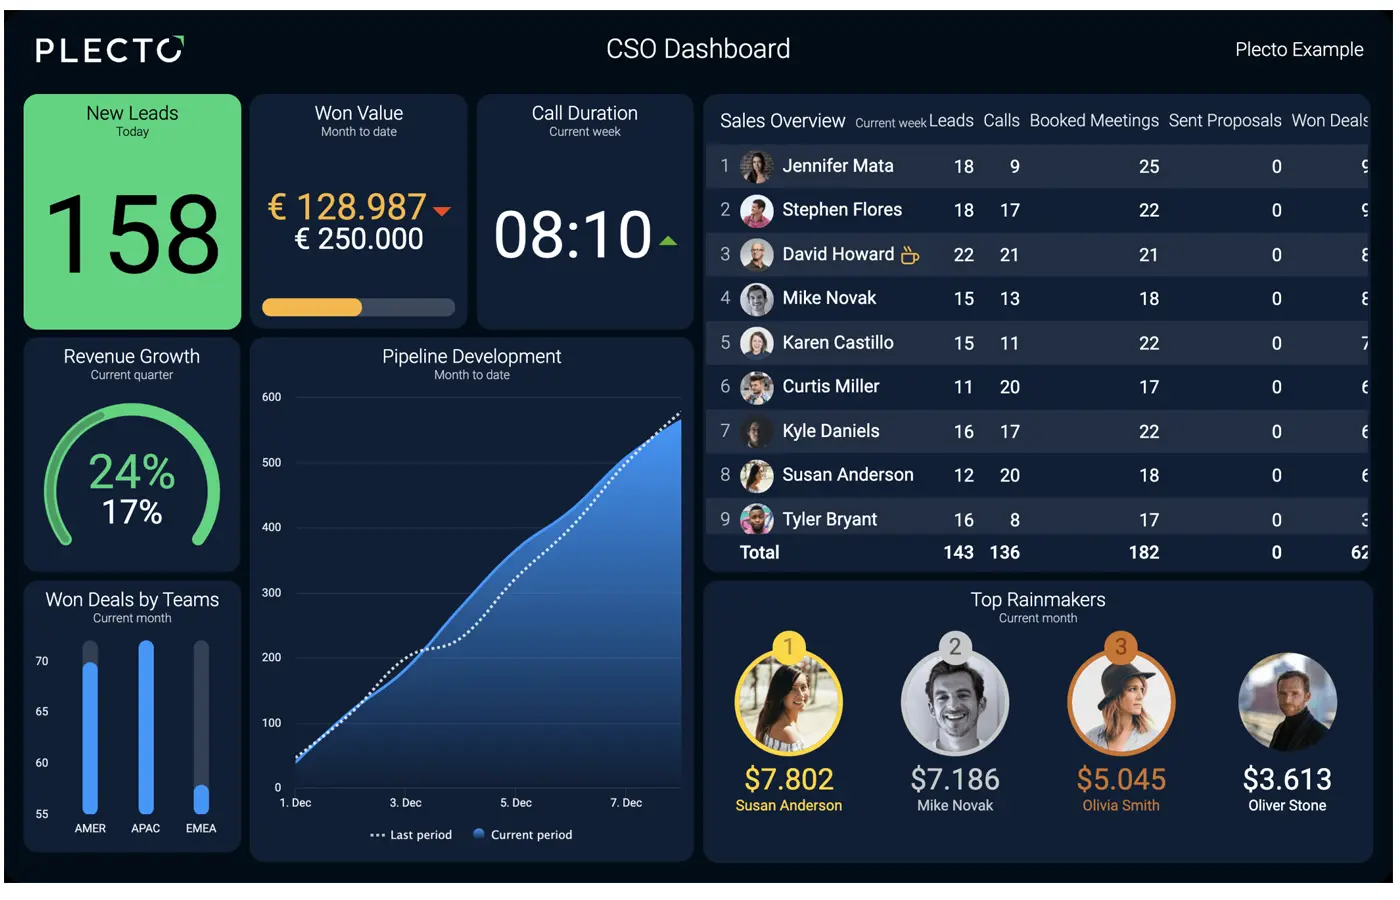 Plecto CSO Dashboard example, visualizing metrics and KPIs on a dark background